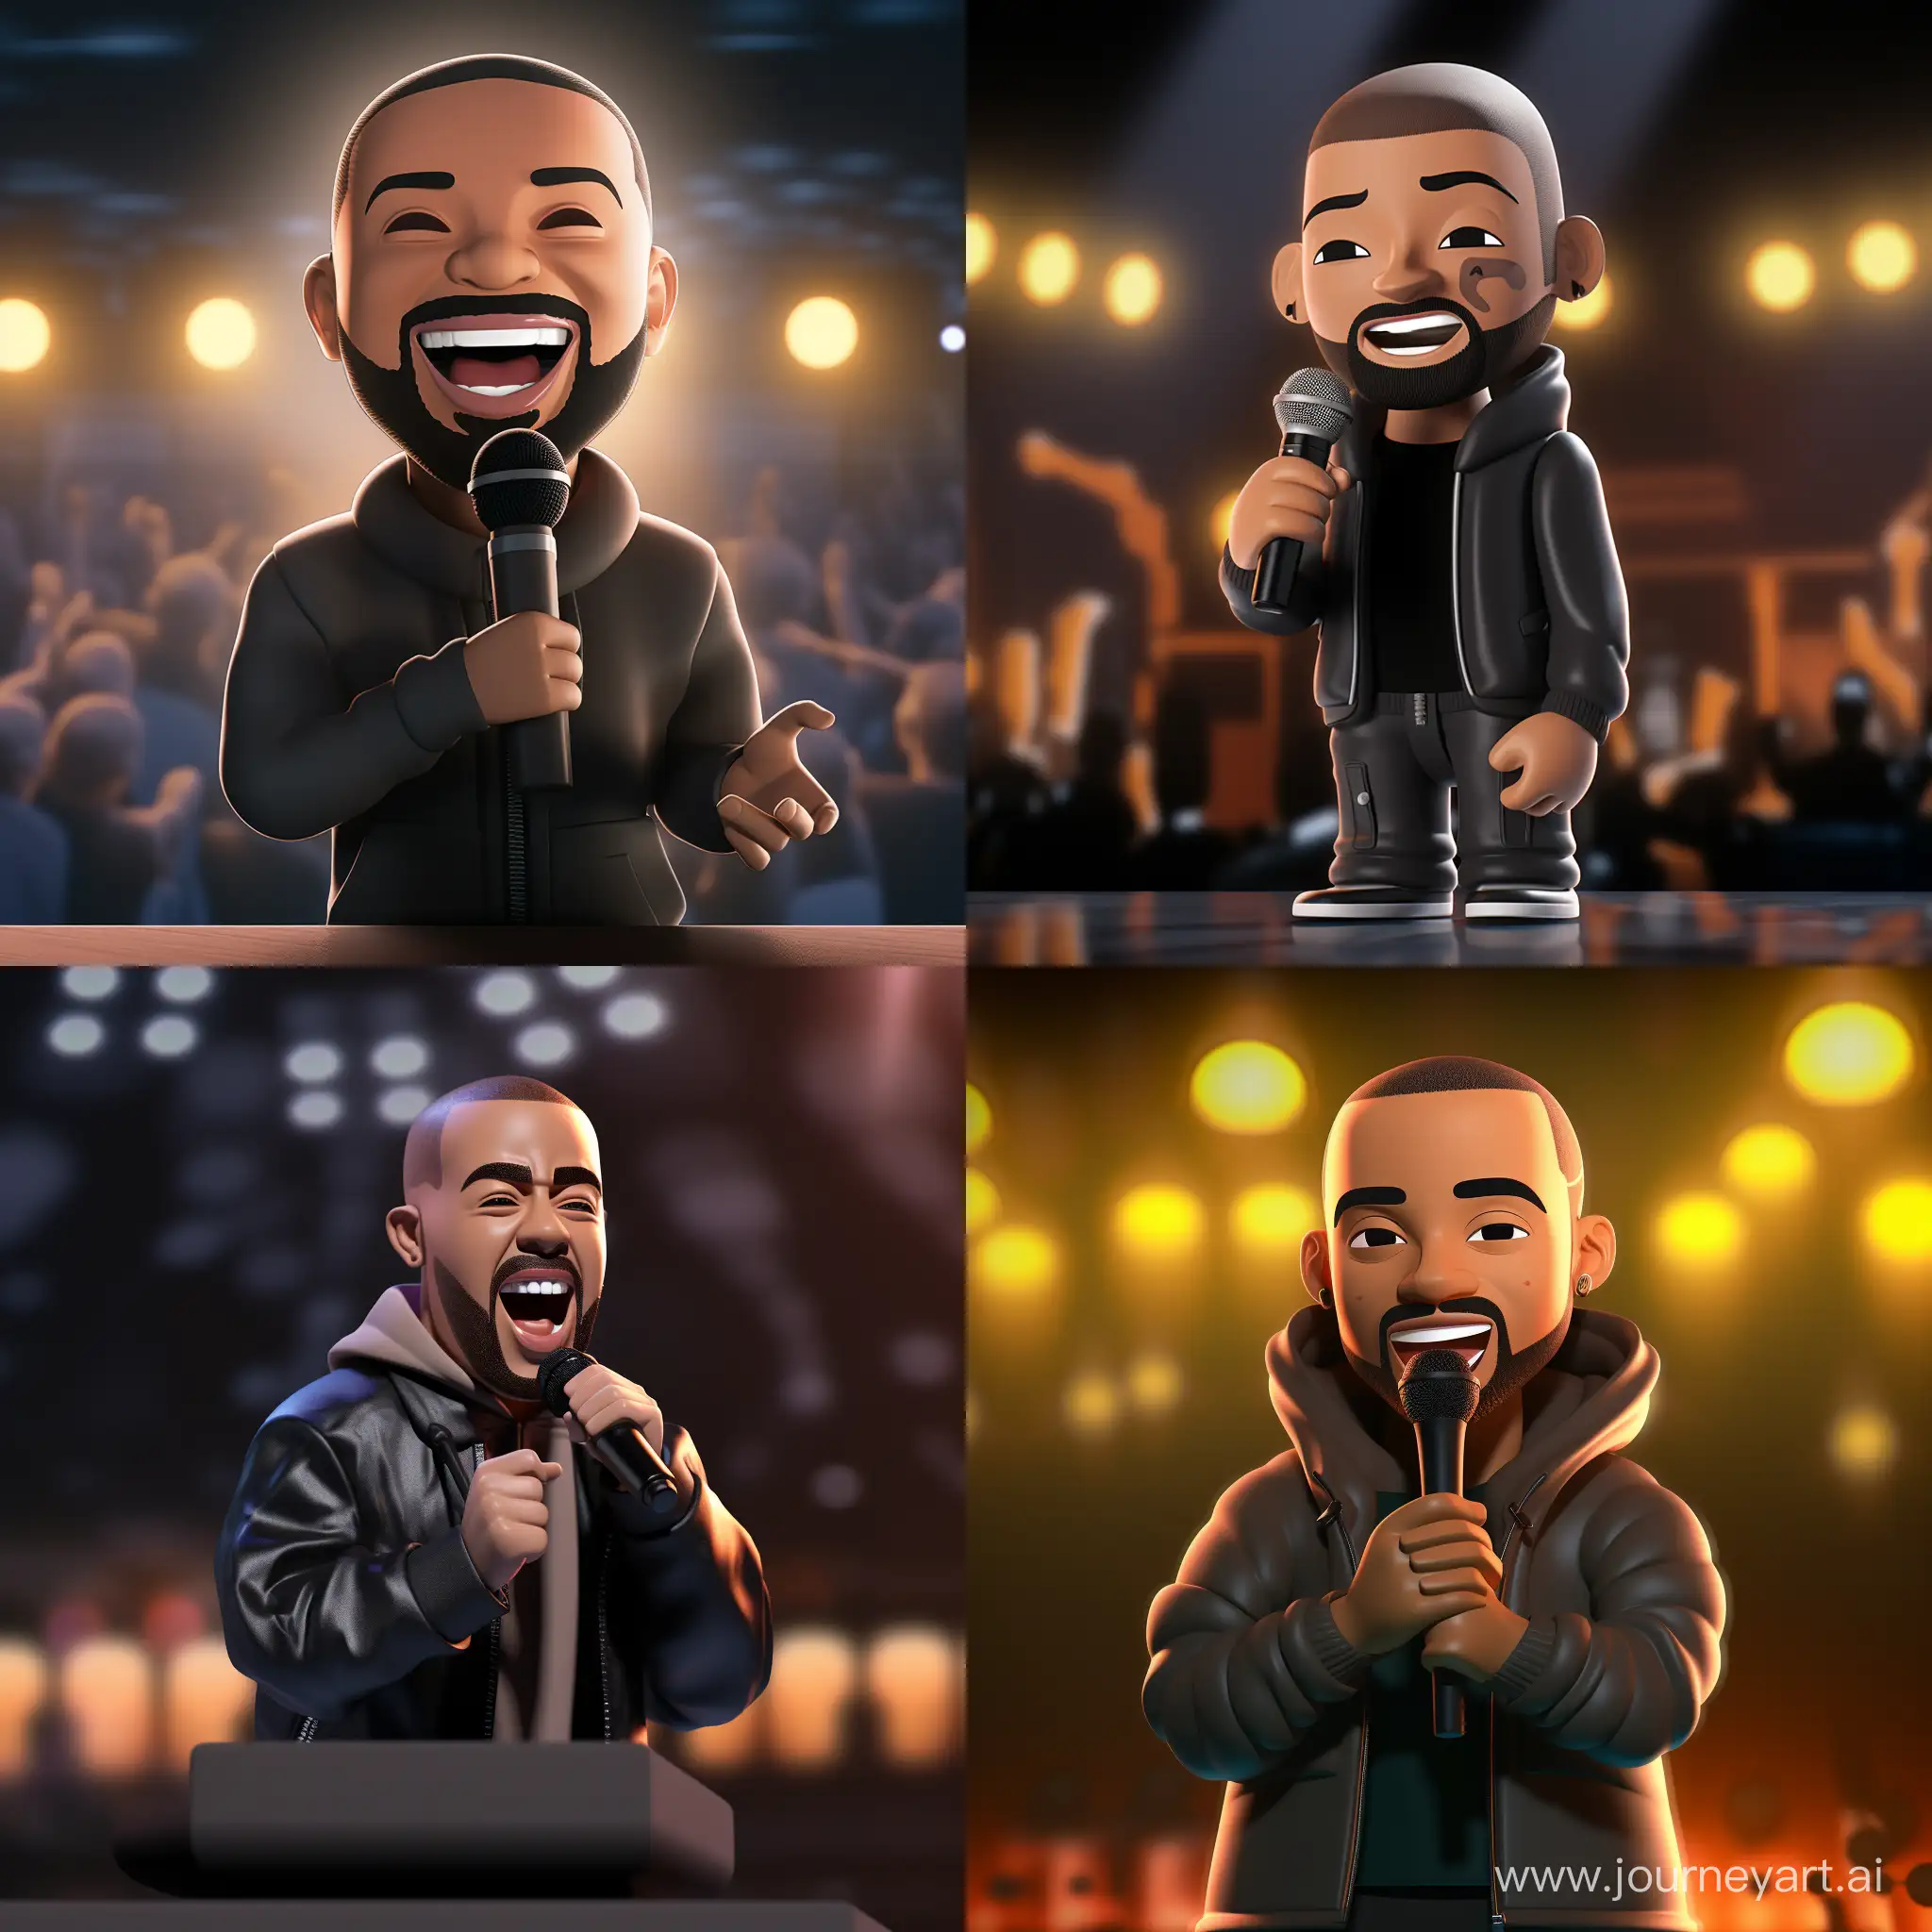 Smiling-AfricanAmerican-LEGO-Singer-with-Dove-Hoodie-on-Concert-Stage